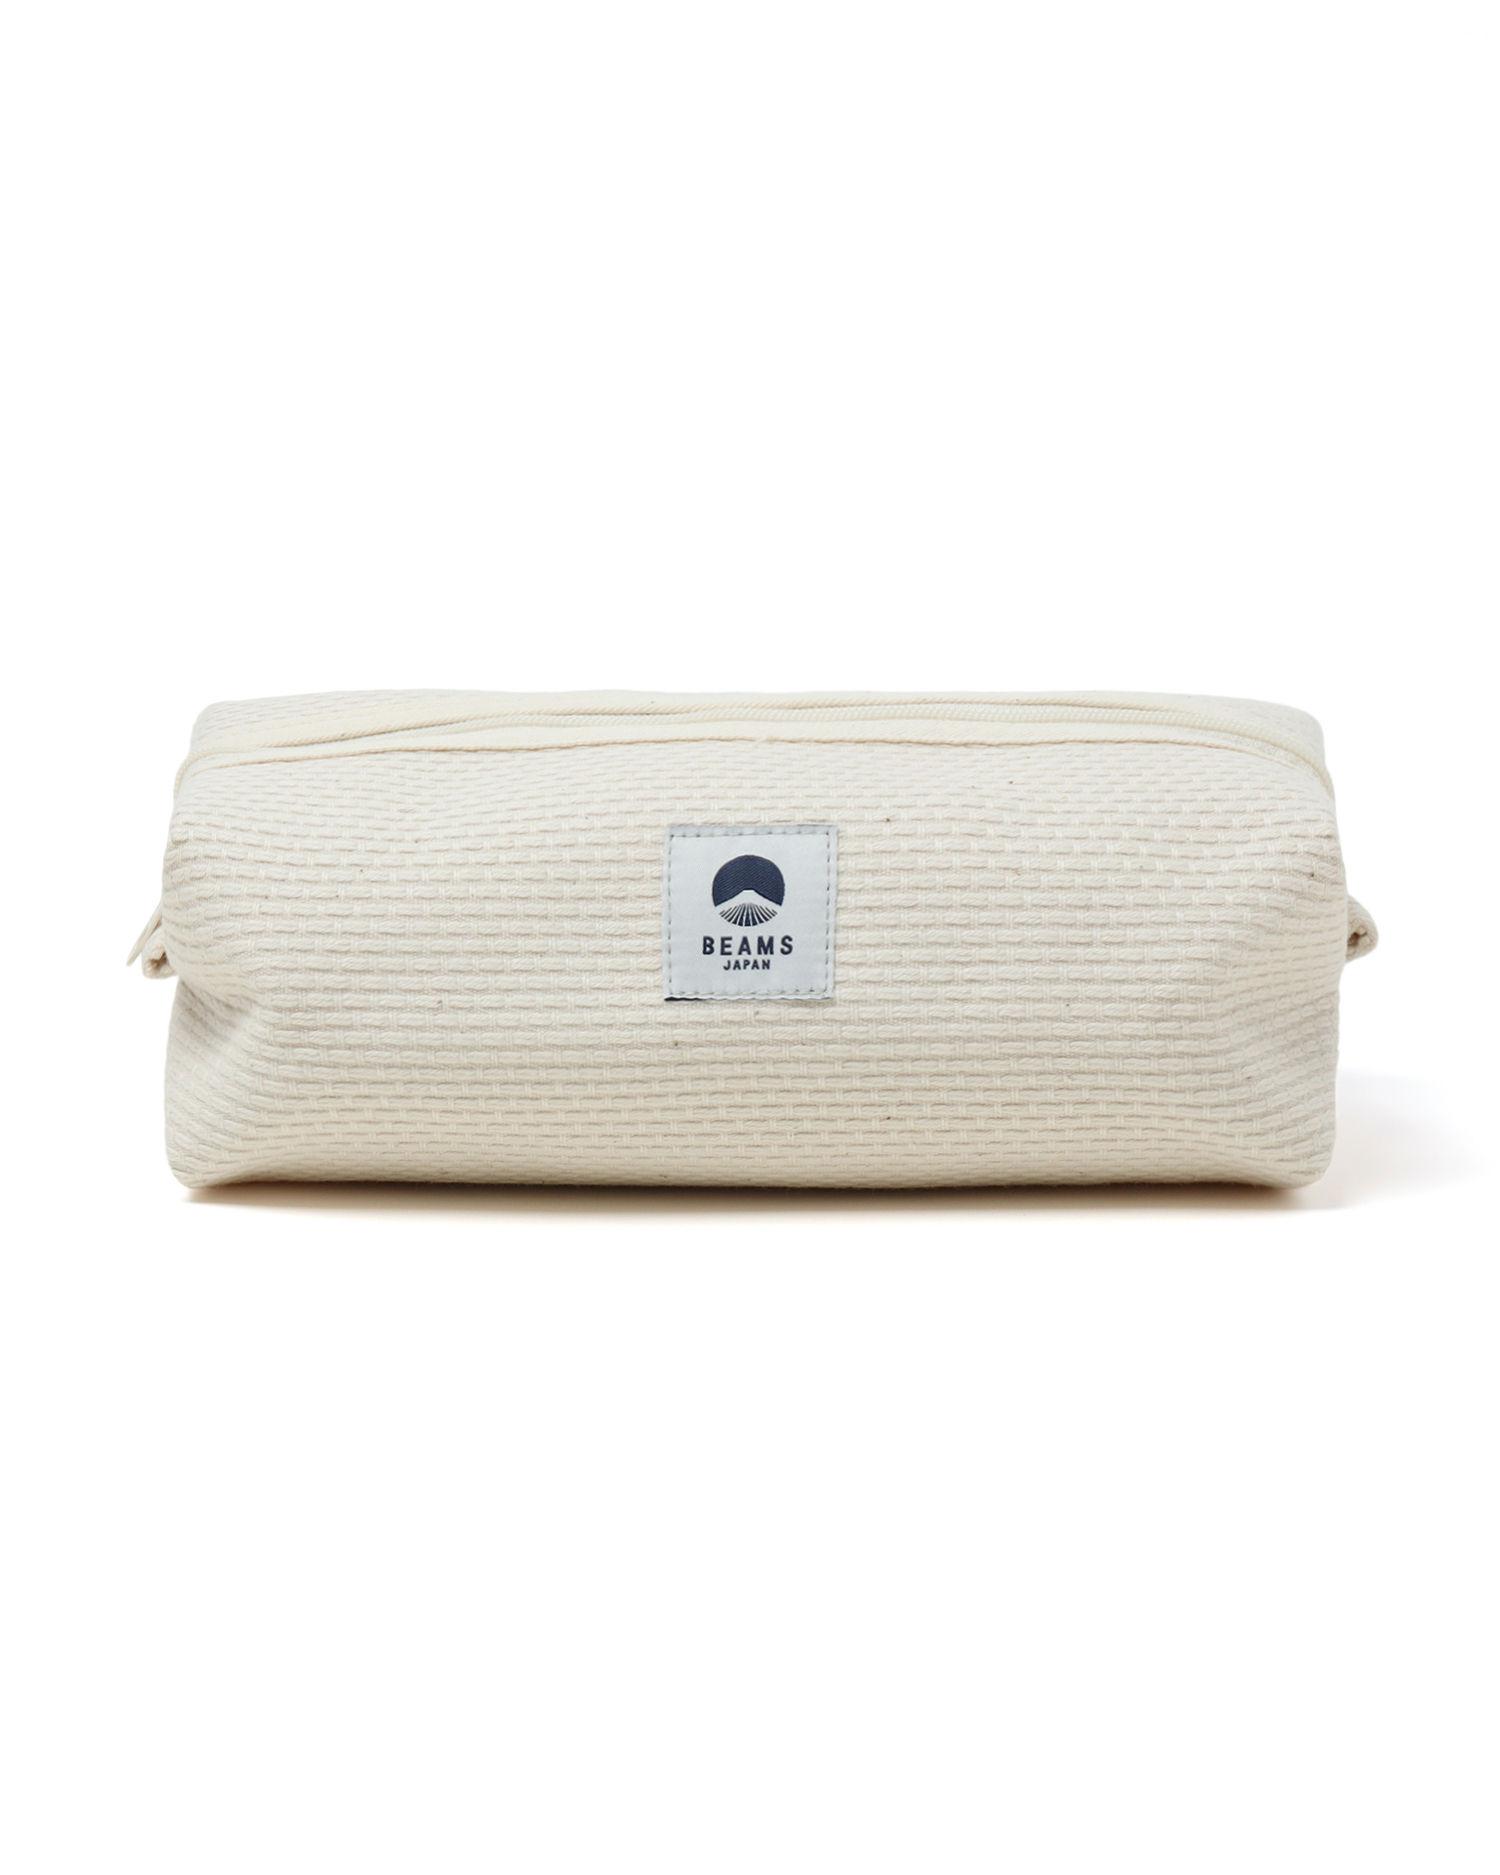 Logo zip pouch by BEAMS JAPAN